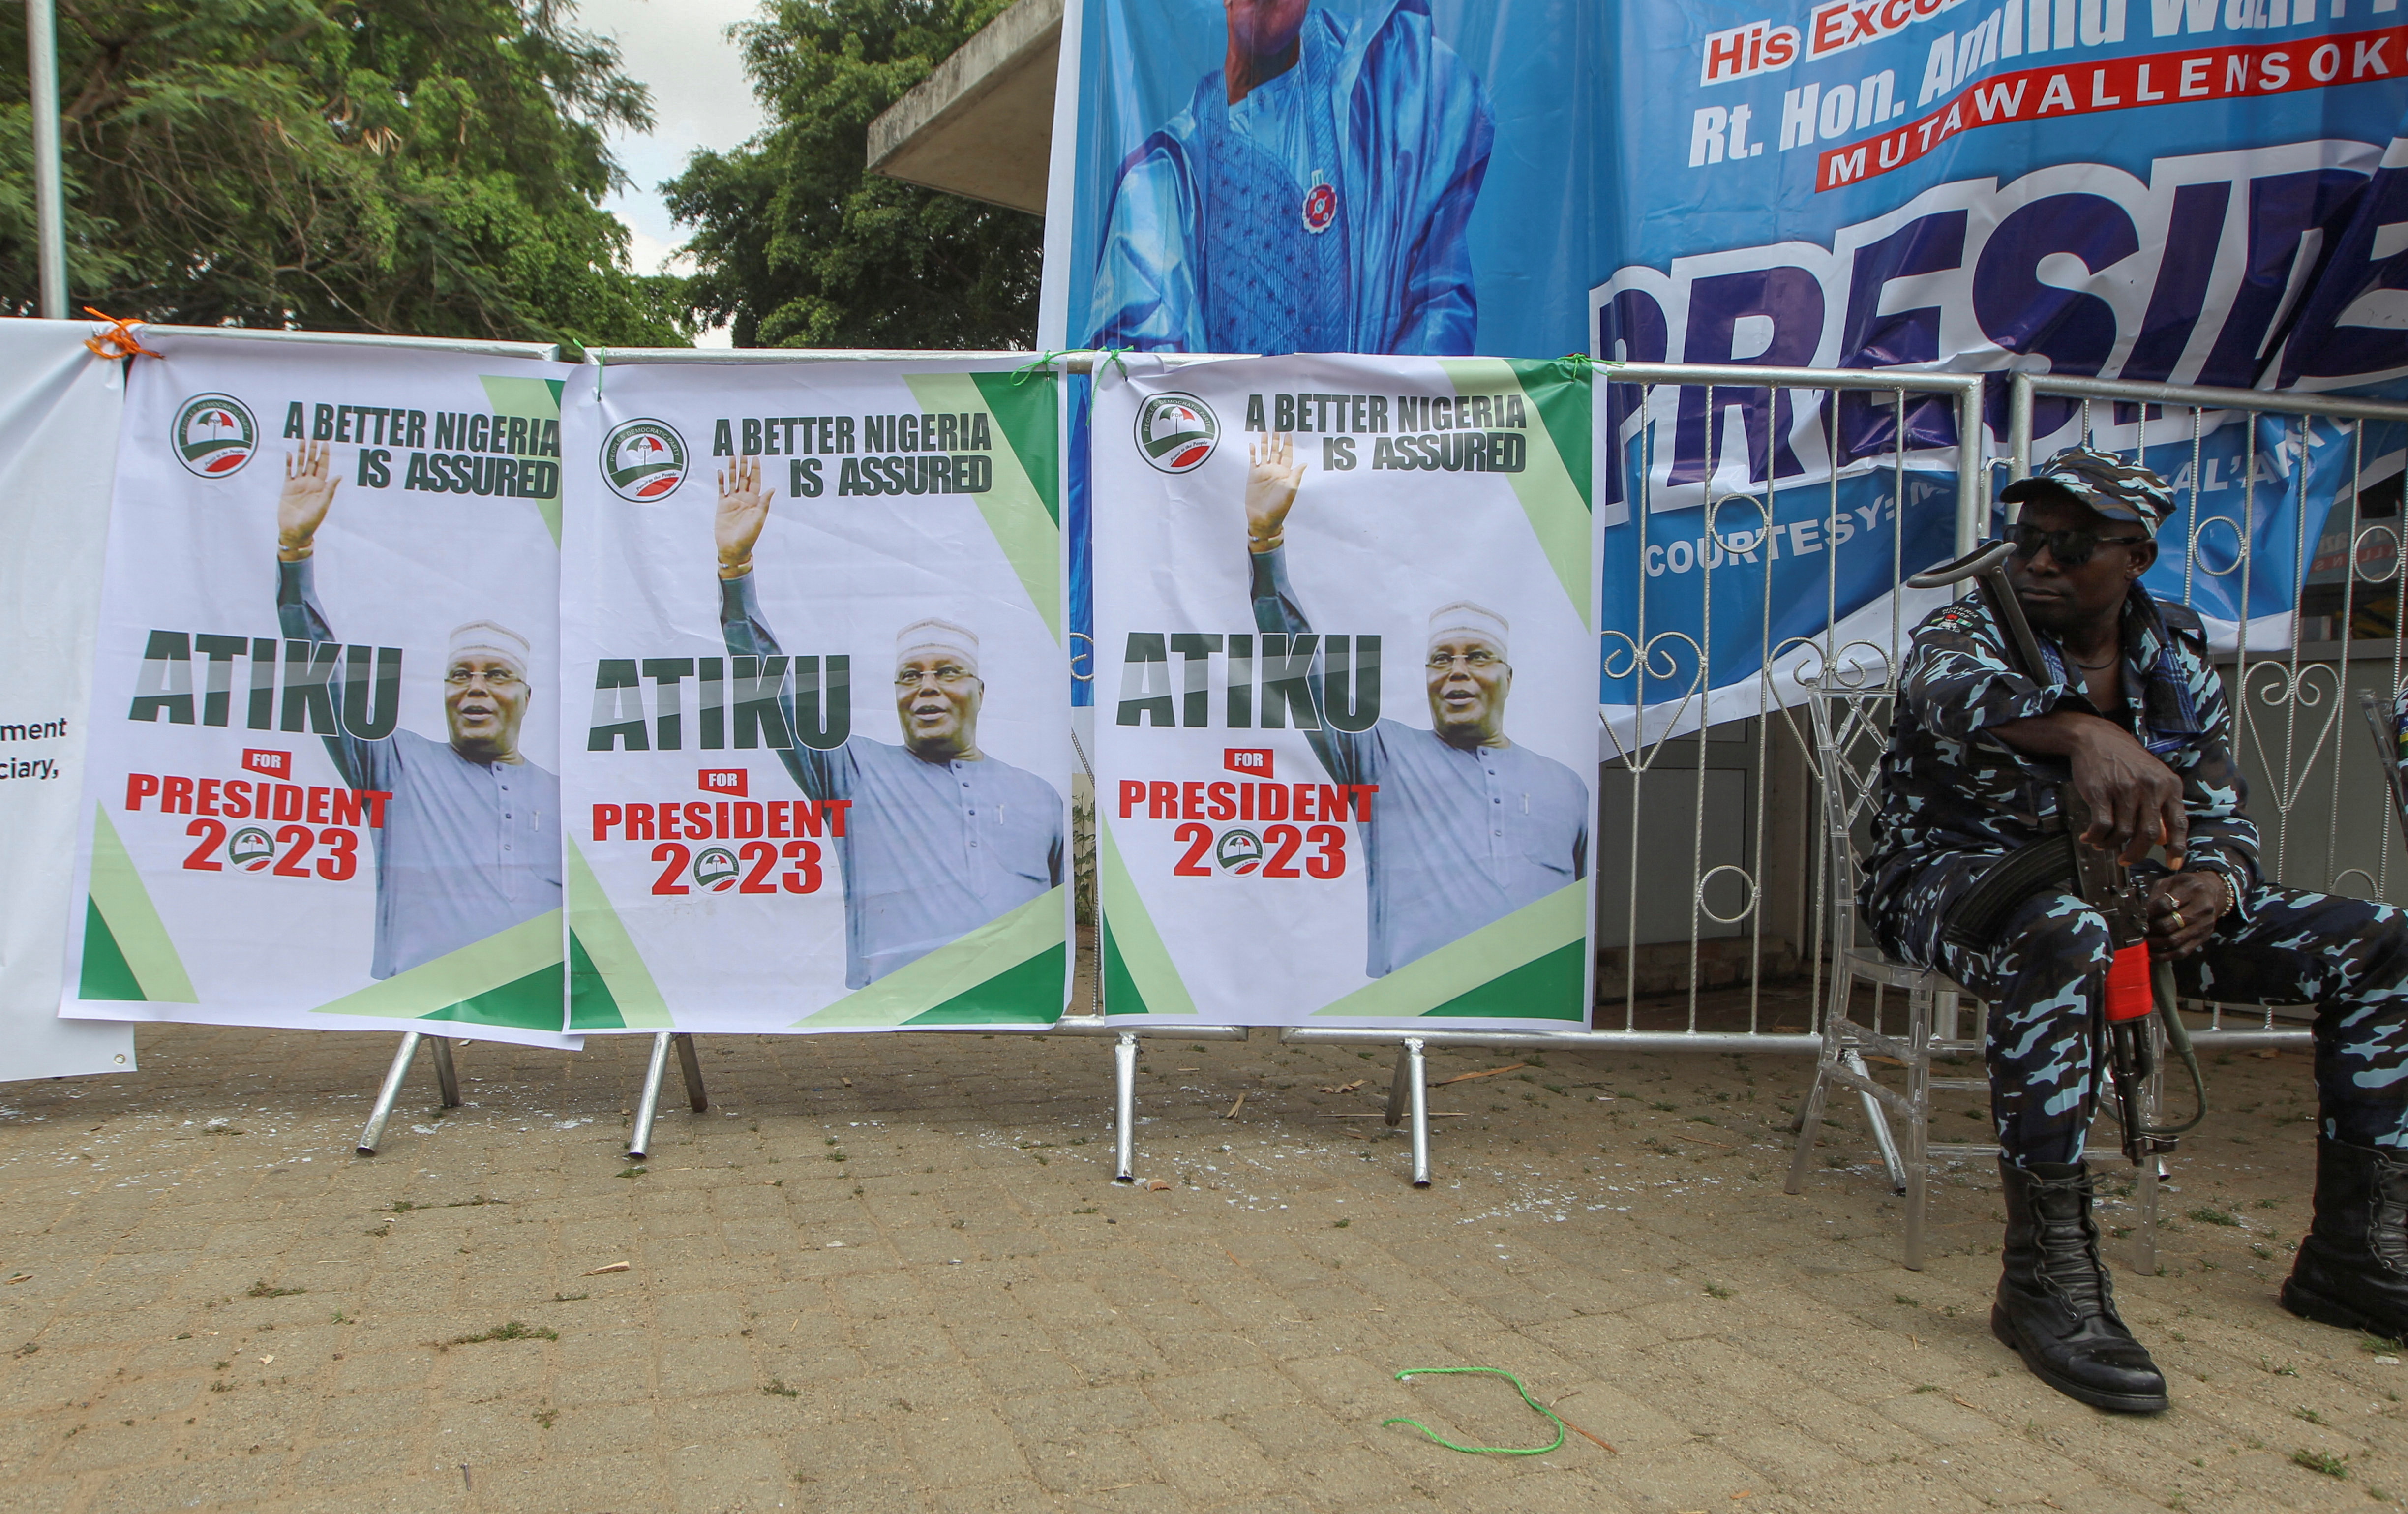 A police man looks at Posters of Former Nigeria Vice president Atiku Abubakar at the National convention centre in Abuja